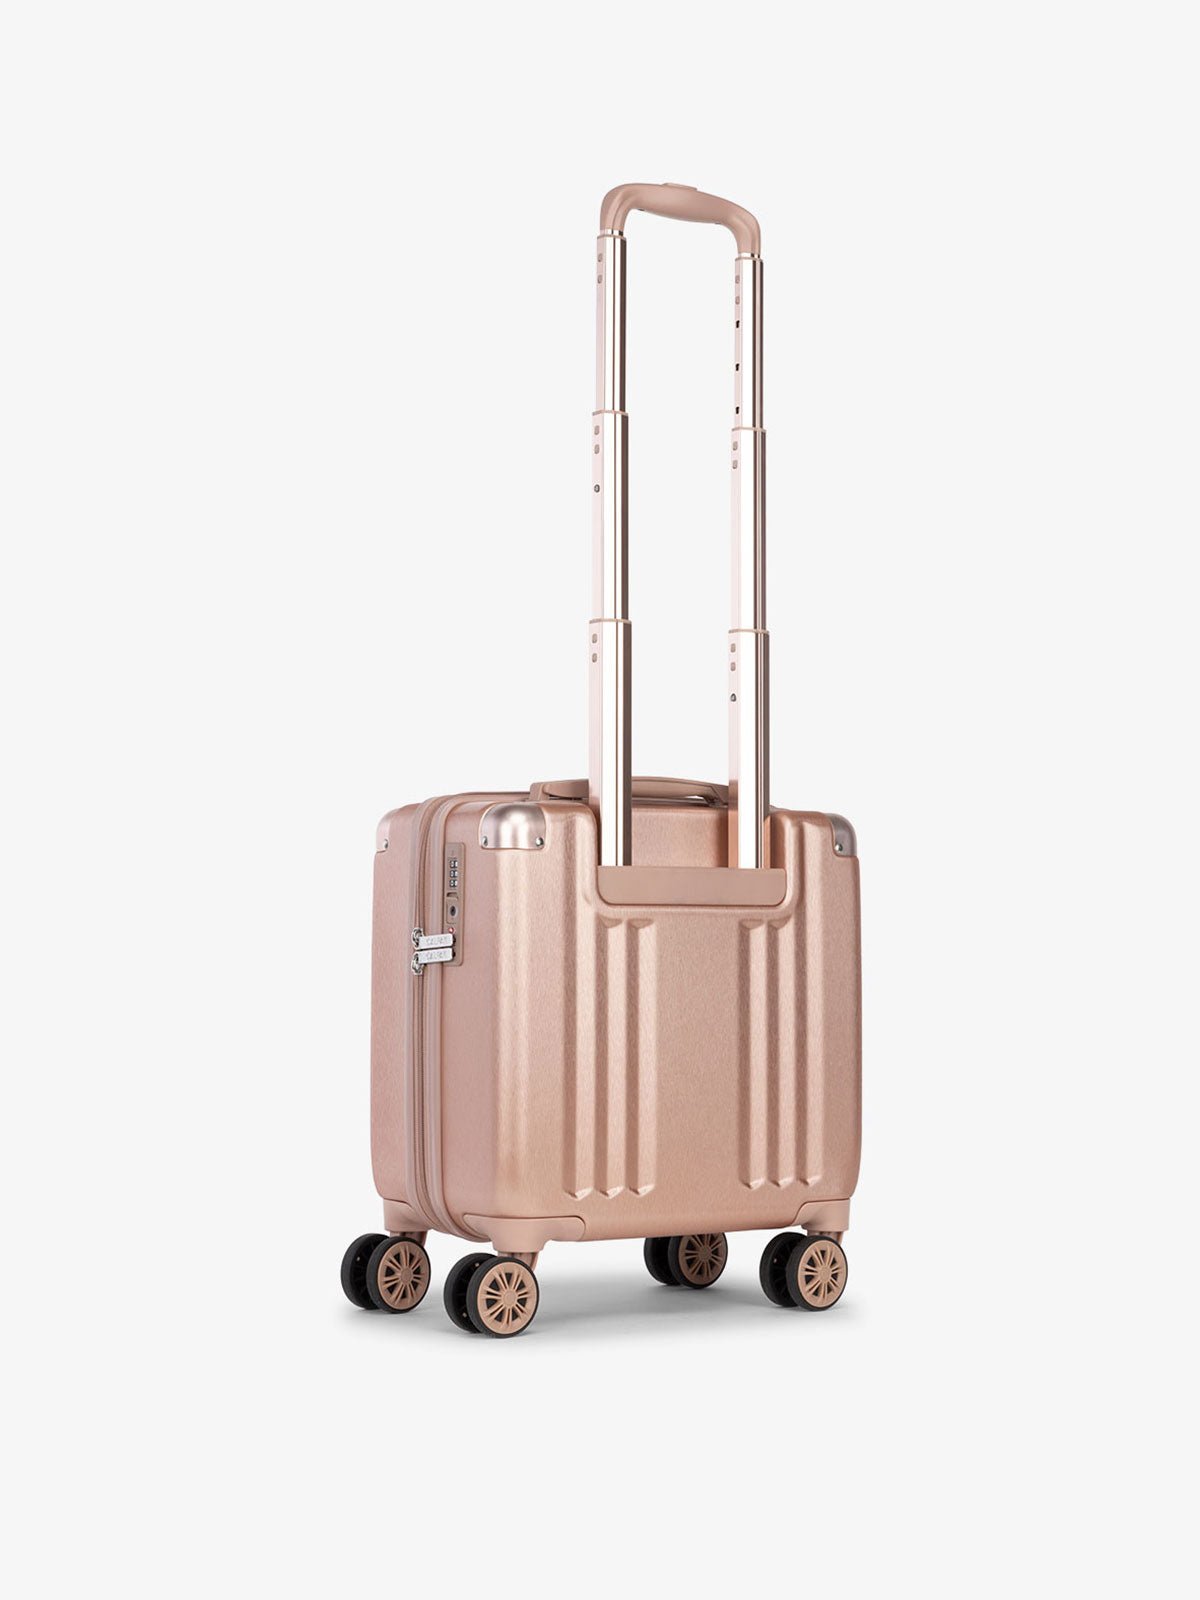 CALPAK Ambuer small carry on suitcase with 360 spinner wheels in rose gold